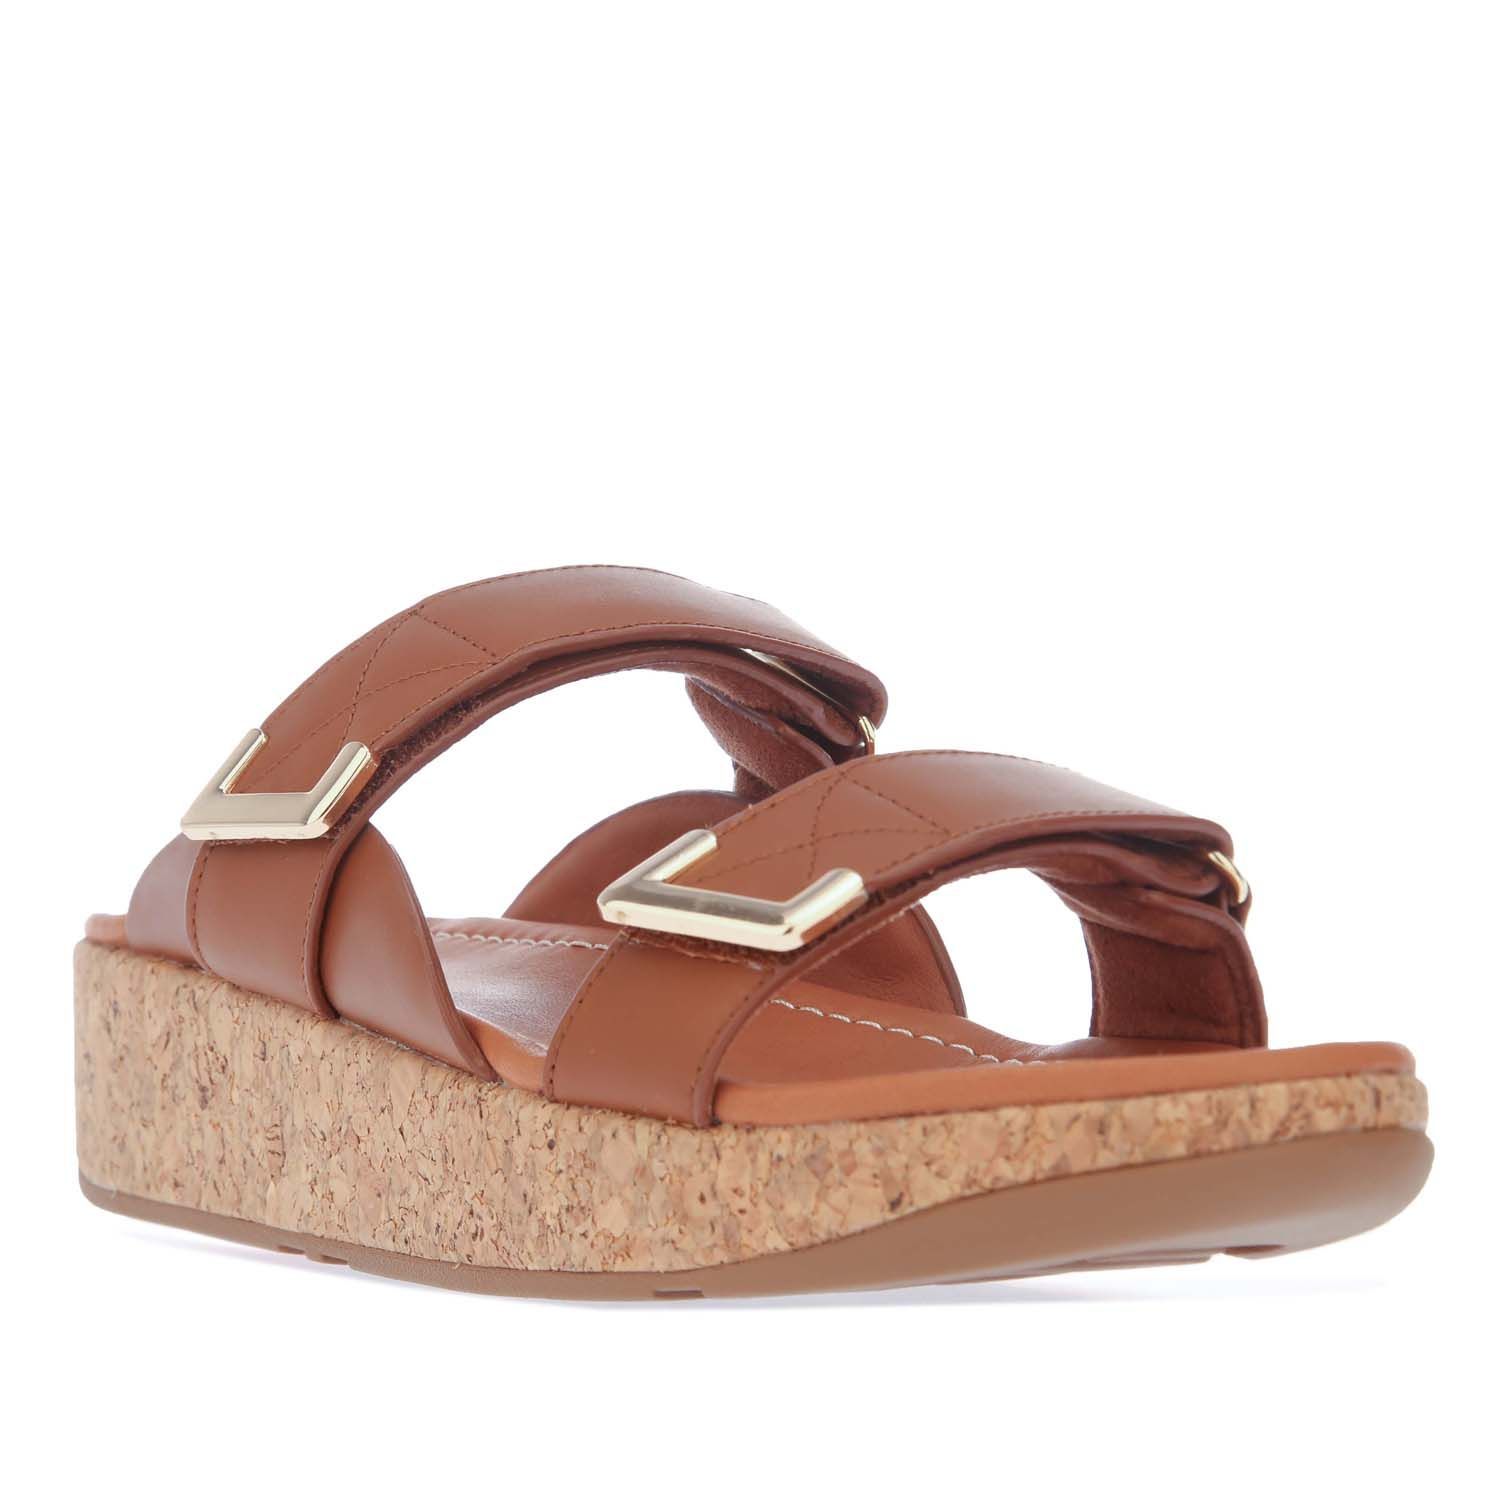 Womens Fit Flop Remi Adjustable Slide Sandals in tan.- Softly padded leather uppers.- Slip on closure.- Metal-tipped strap.- Adjustable quick-stick straps.- Leather-lined footbeds.- Supercushioned FitFlop Microwobbleboard™ midsoles.- Cork-wrapped soles. - Slip-resistant rubber outsole.- Leather upper  Leather lining and sole.- Ref: BL6592